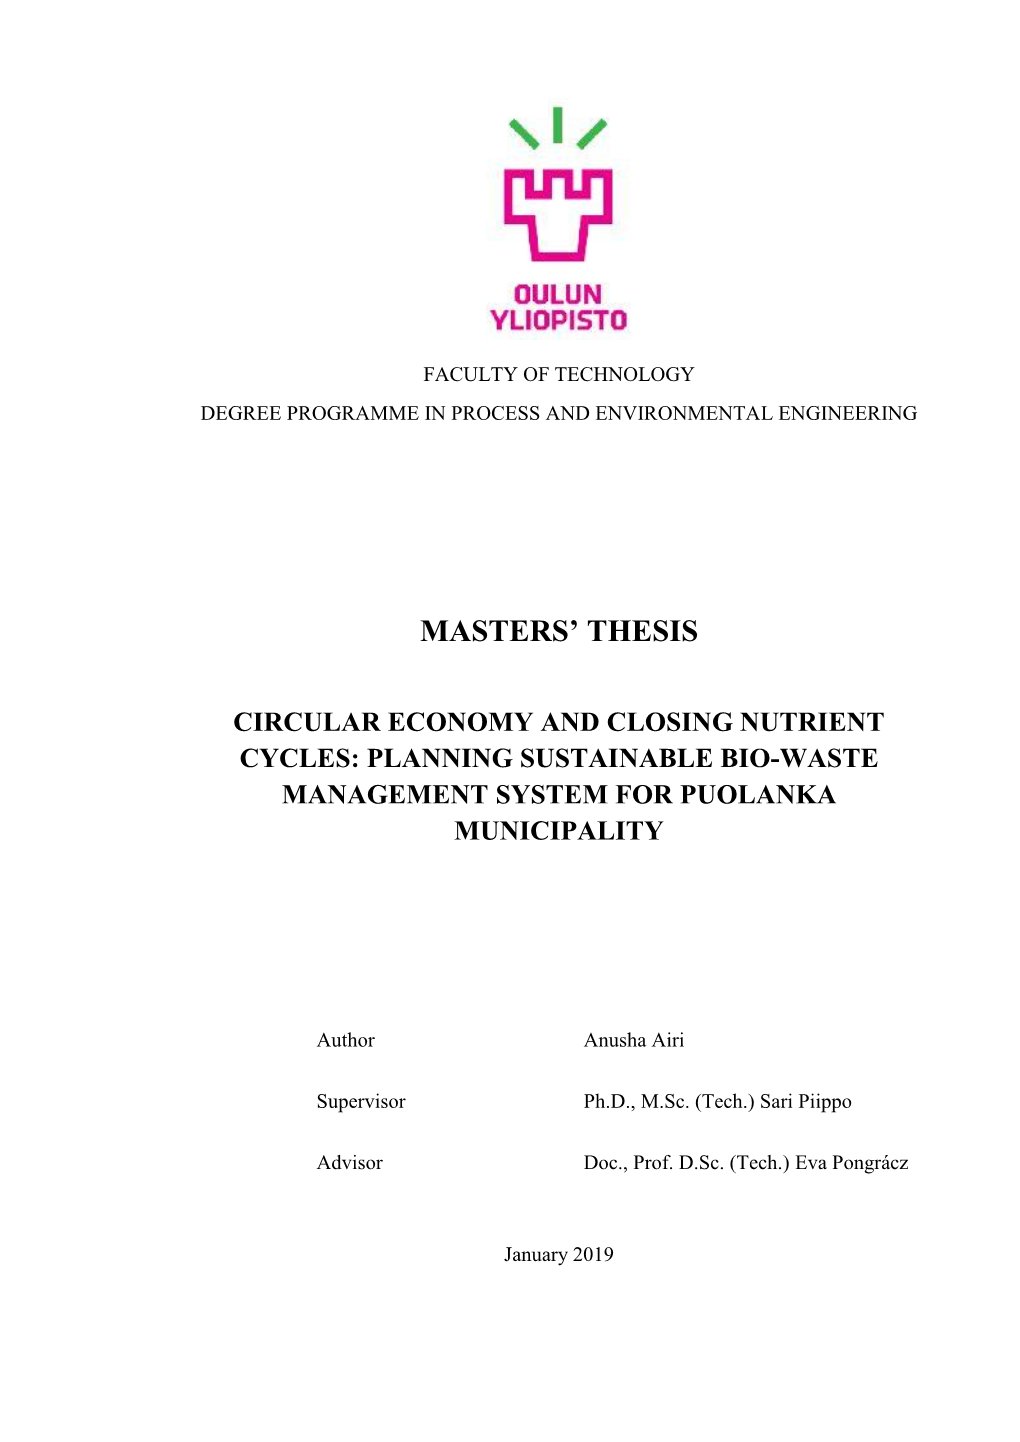 Masters' Thesis